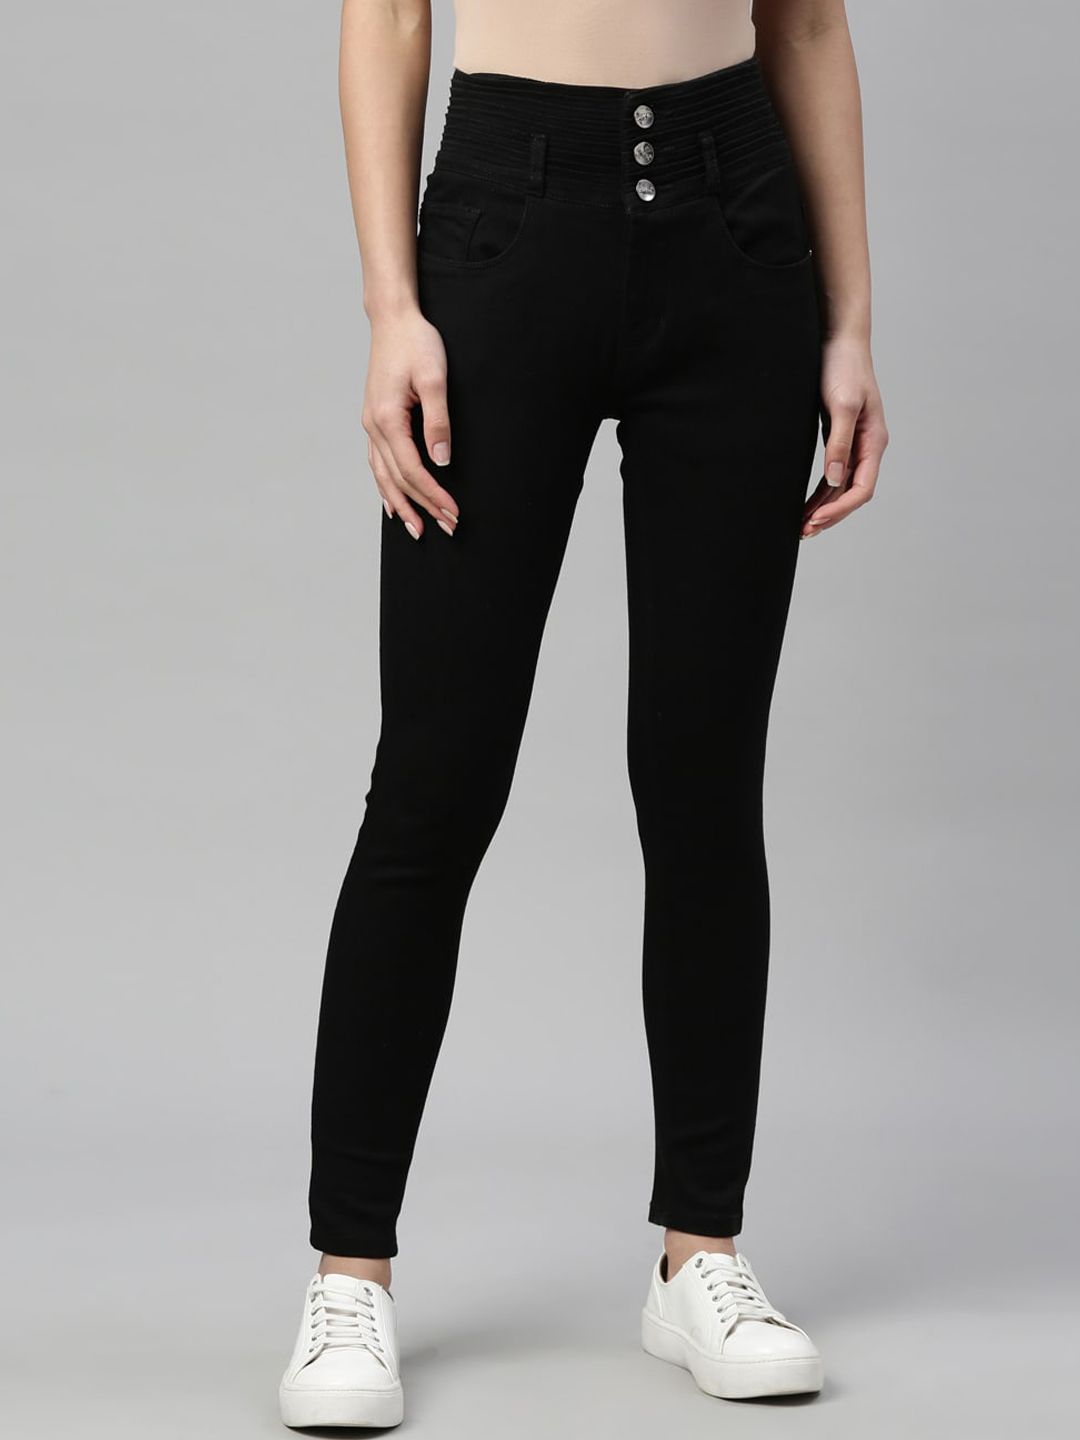 ZHEIA Women Black Lean Skinny Fit High-Rise Stretchable Jeans Price in India